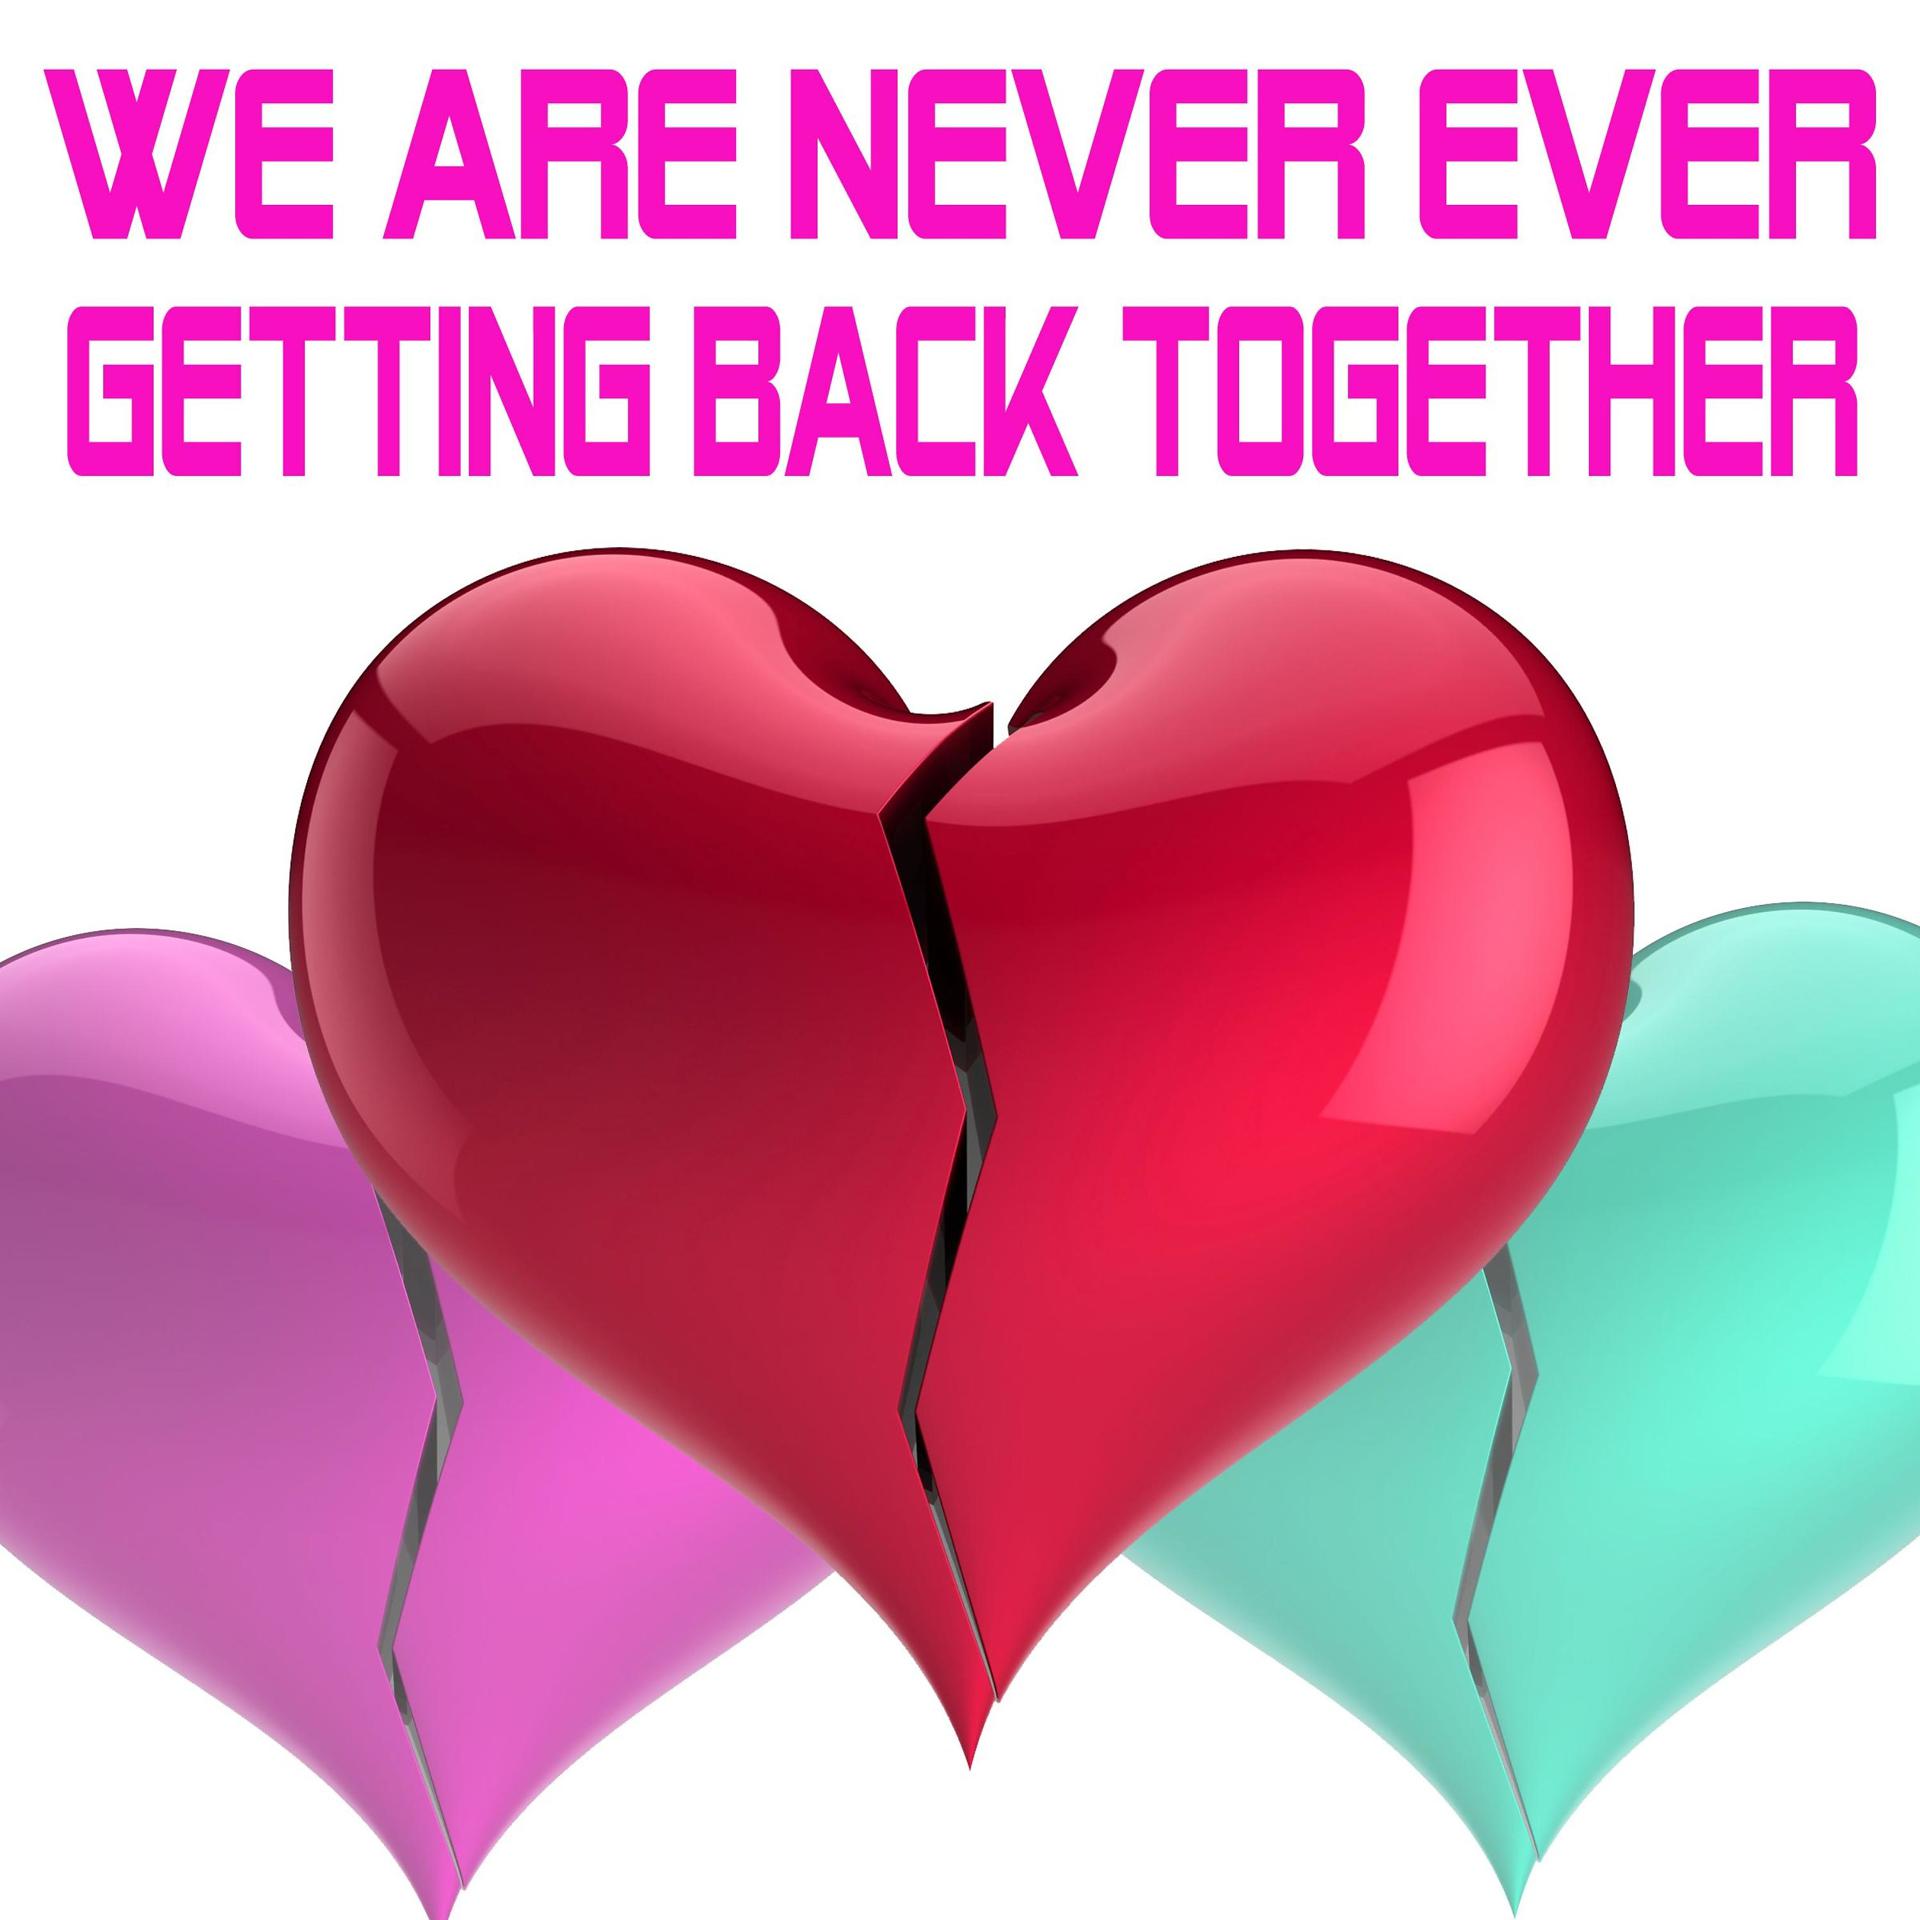 We are together. We are together картинка. We are never ever getting back together. Back together! Картинки. Getting back together